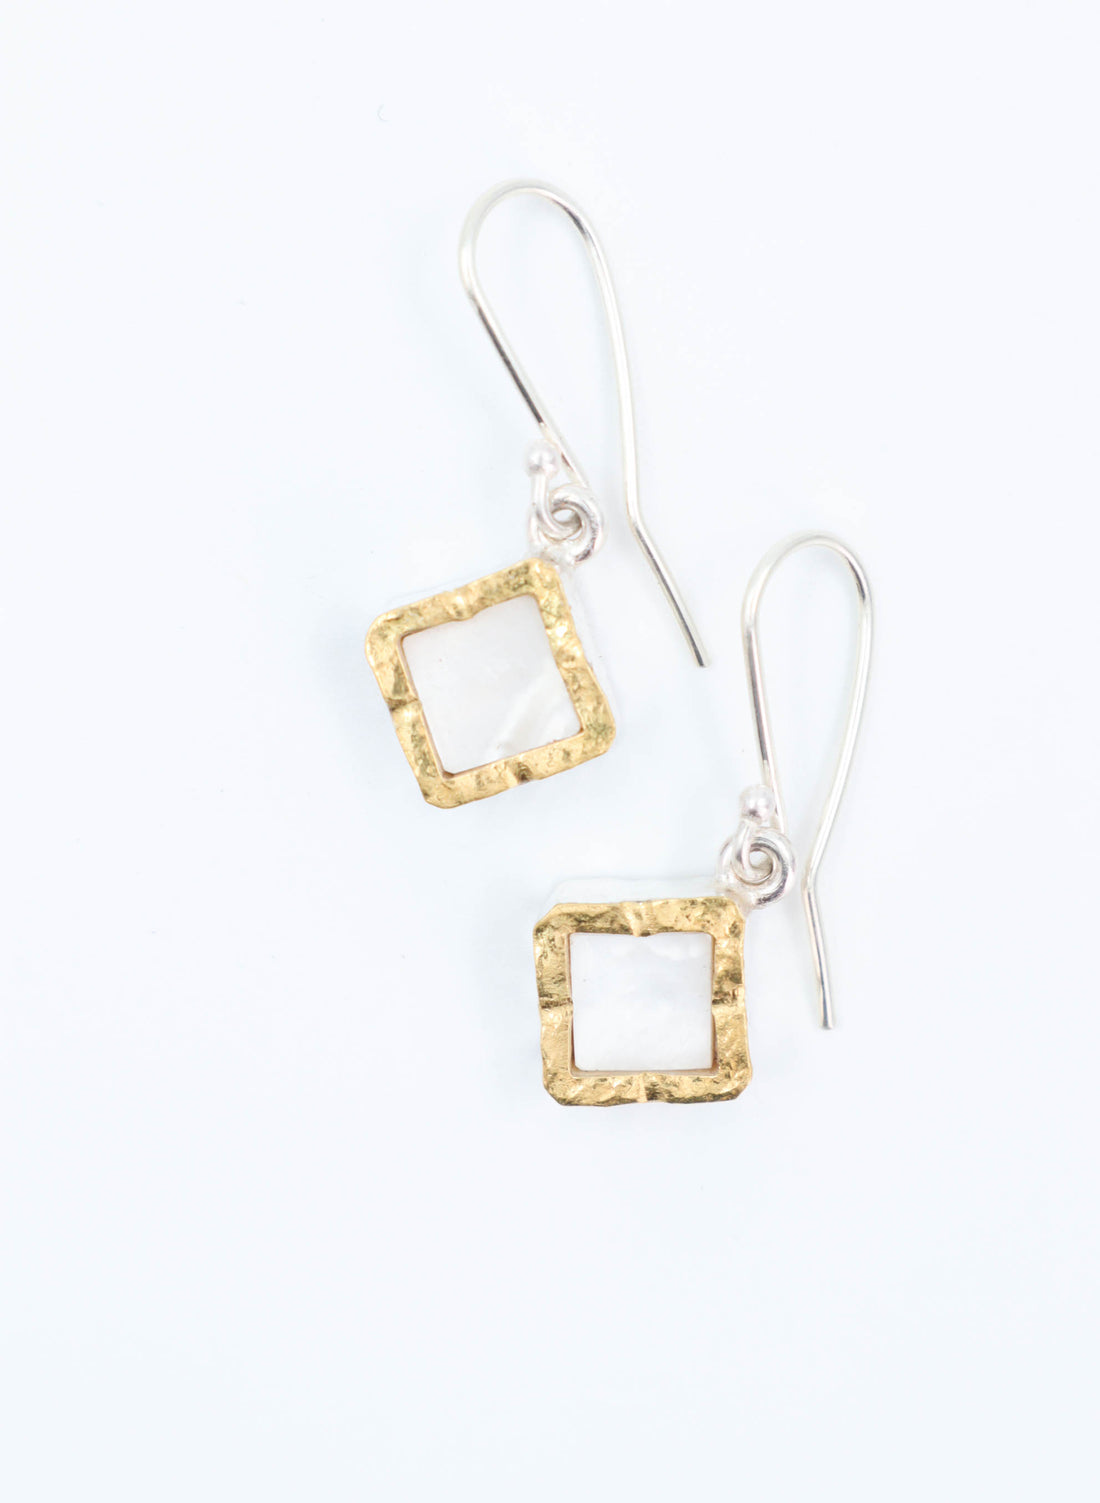 Diamond Shaped Mother of Pearl Earrings - Sterling Silver + 22 CT Gold